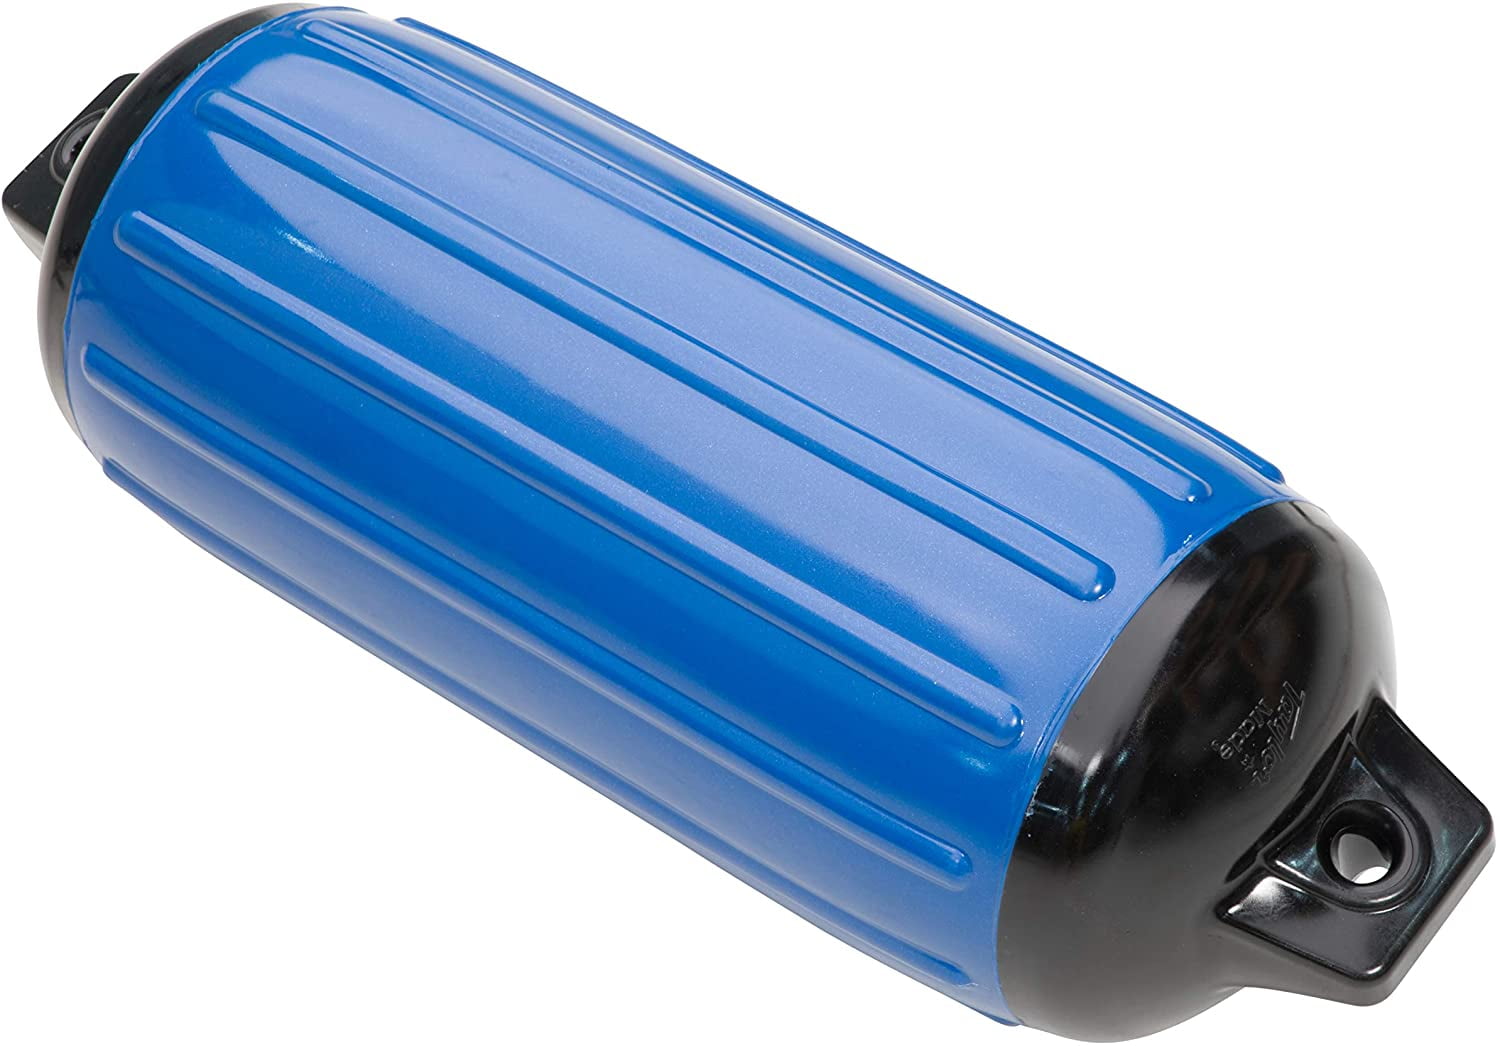 TaylorMade Products Hull Gard Inflatable Vinyl Boat Fender